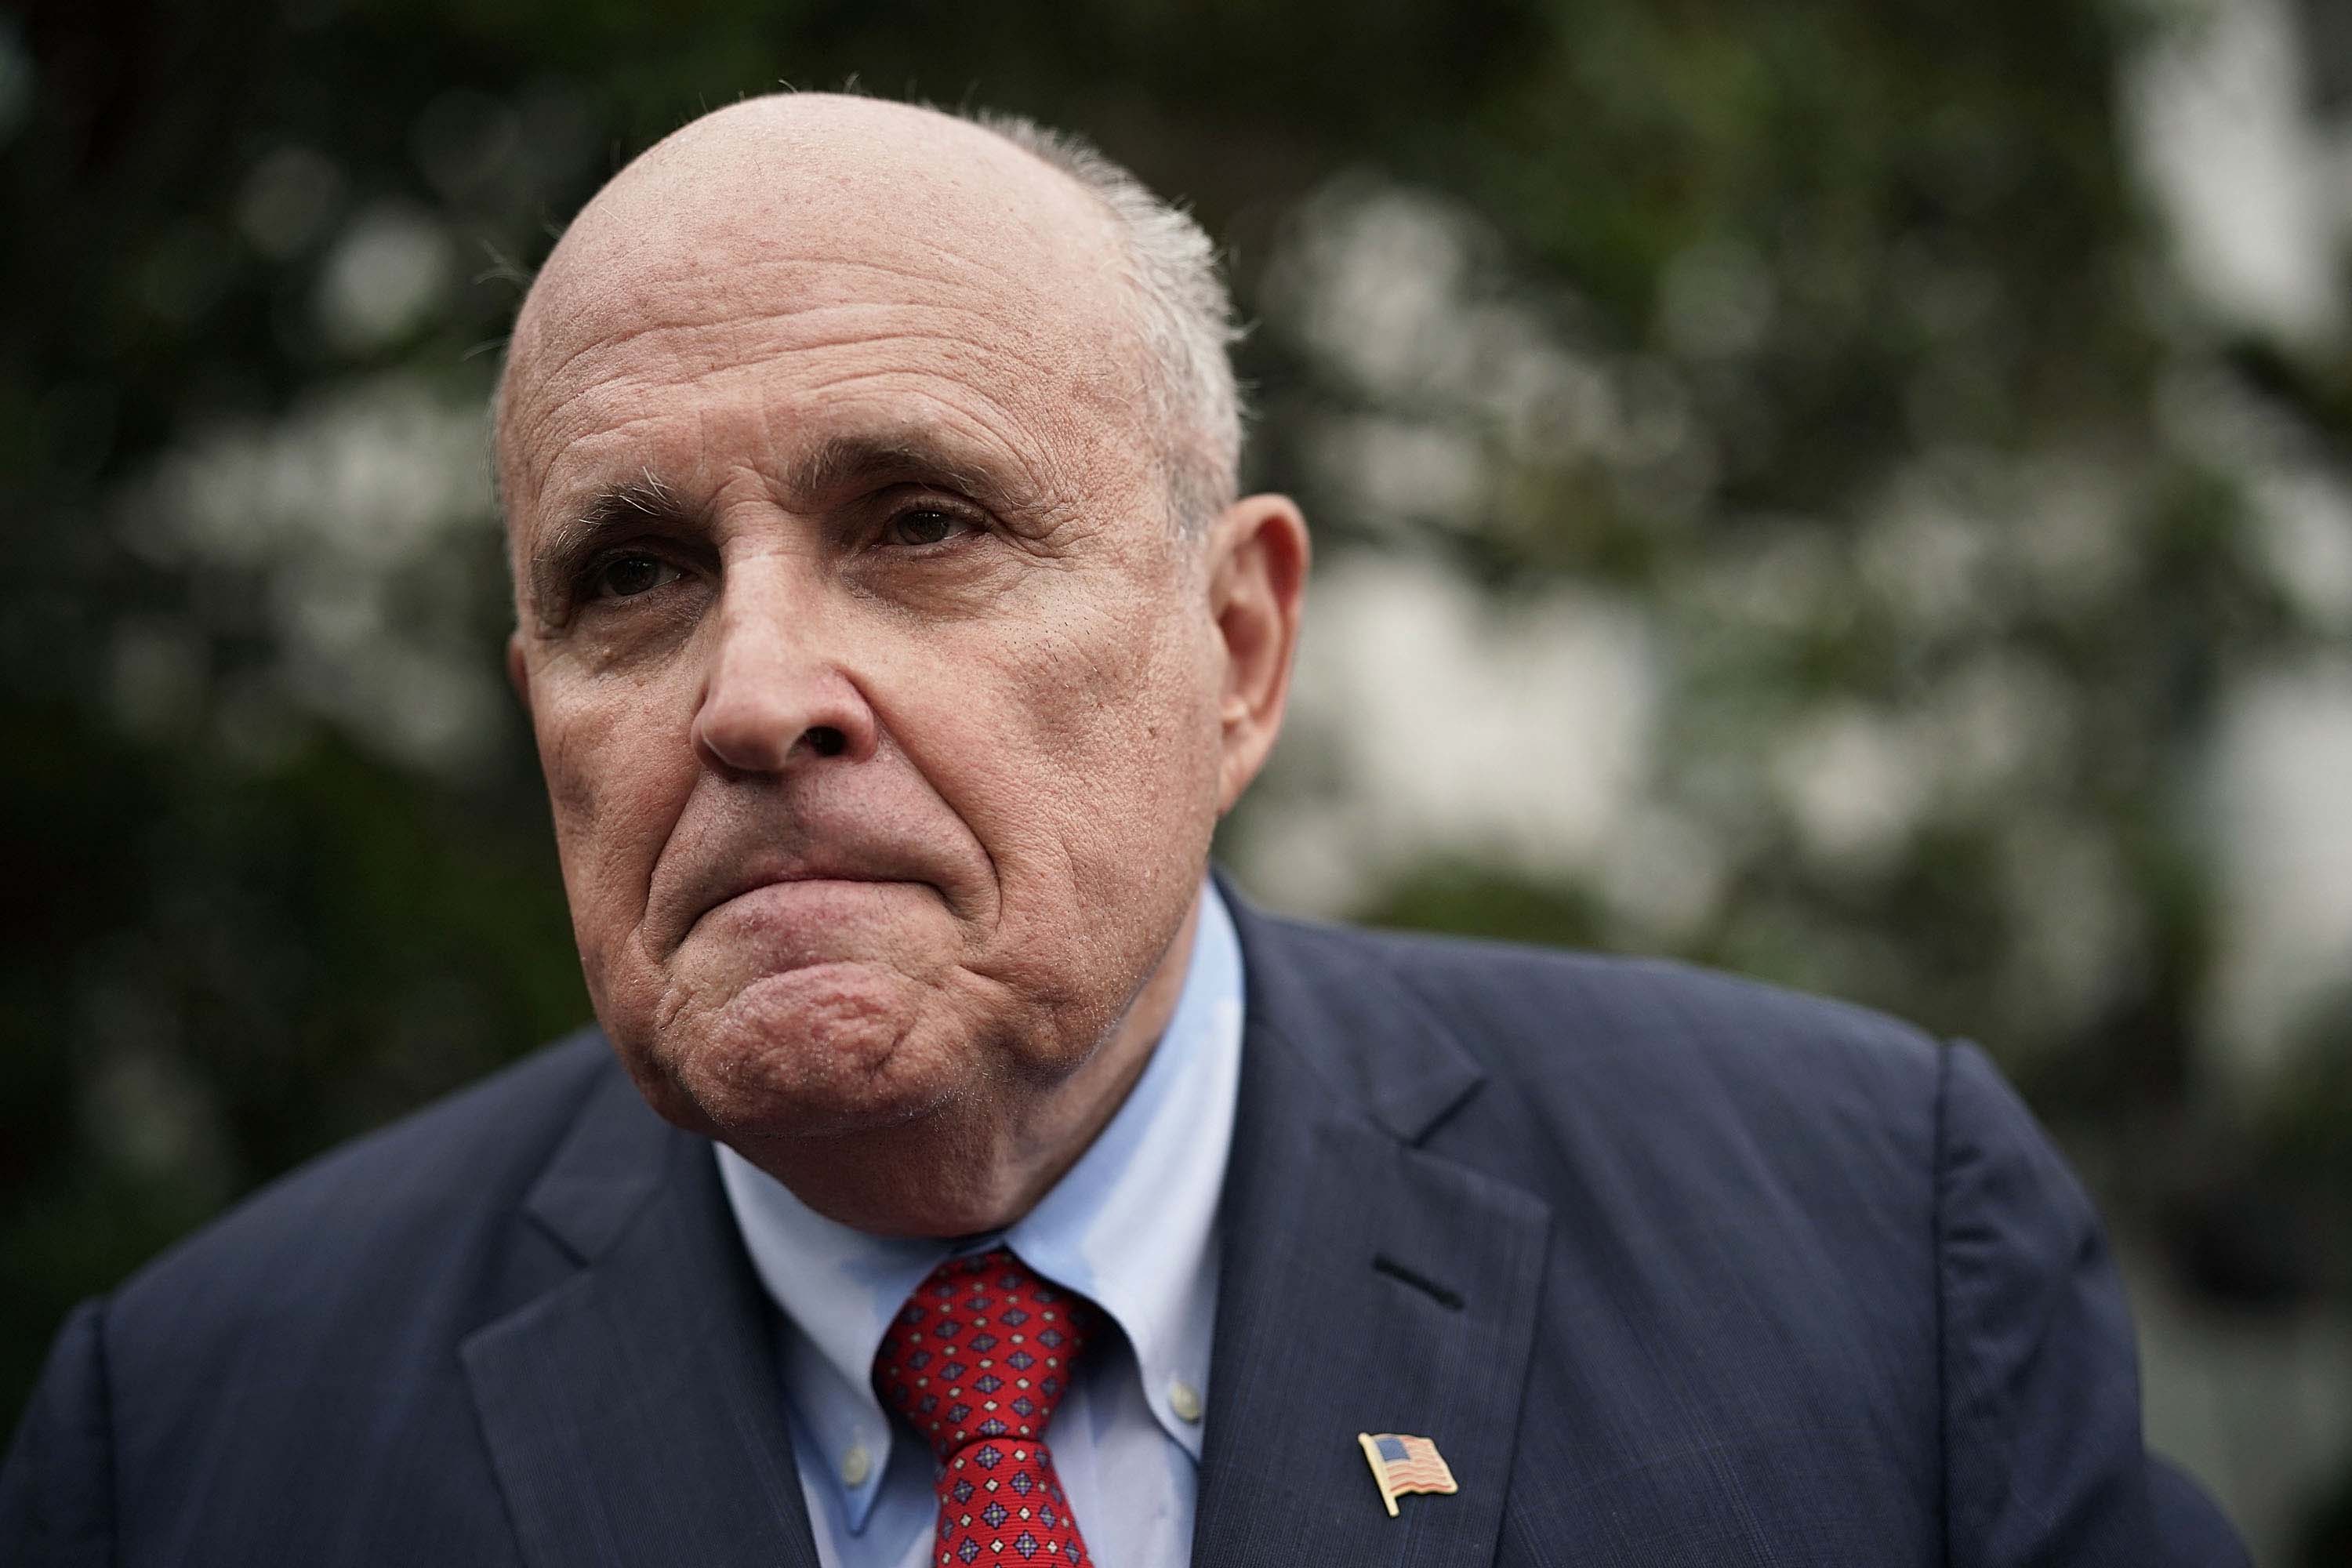 Rudy Giuliani pictured in May 30, 2018.